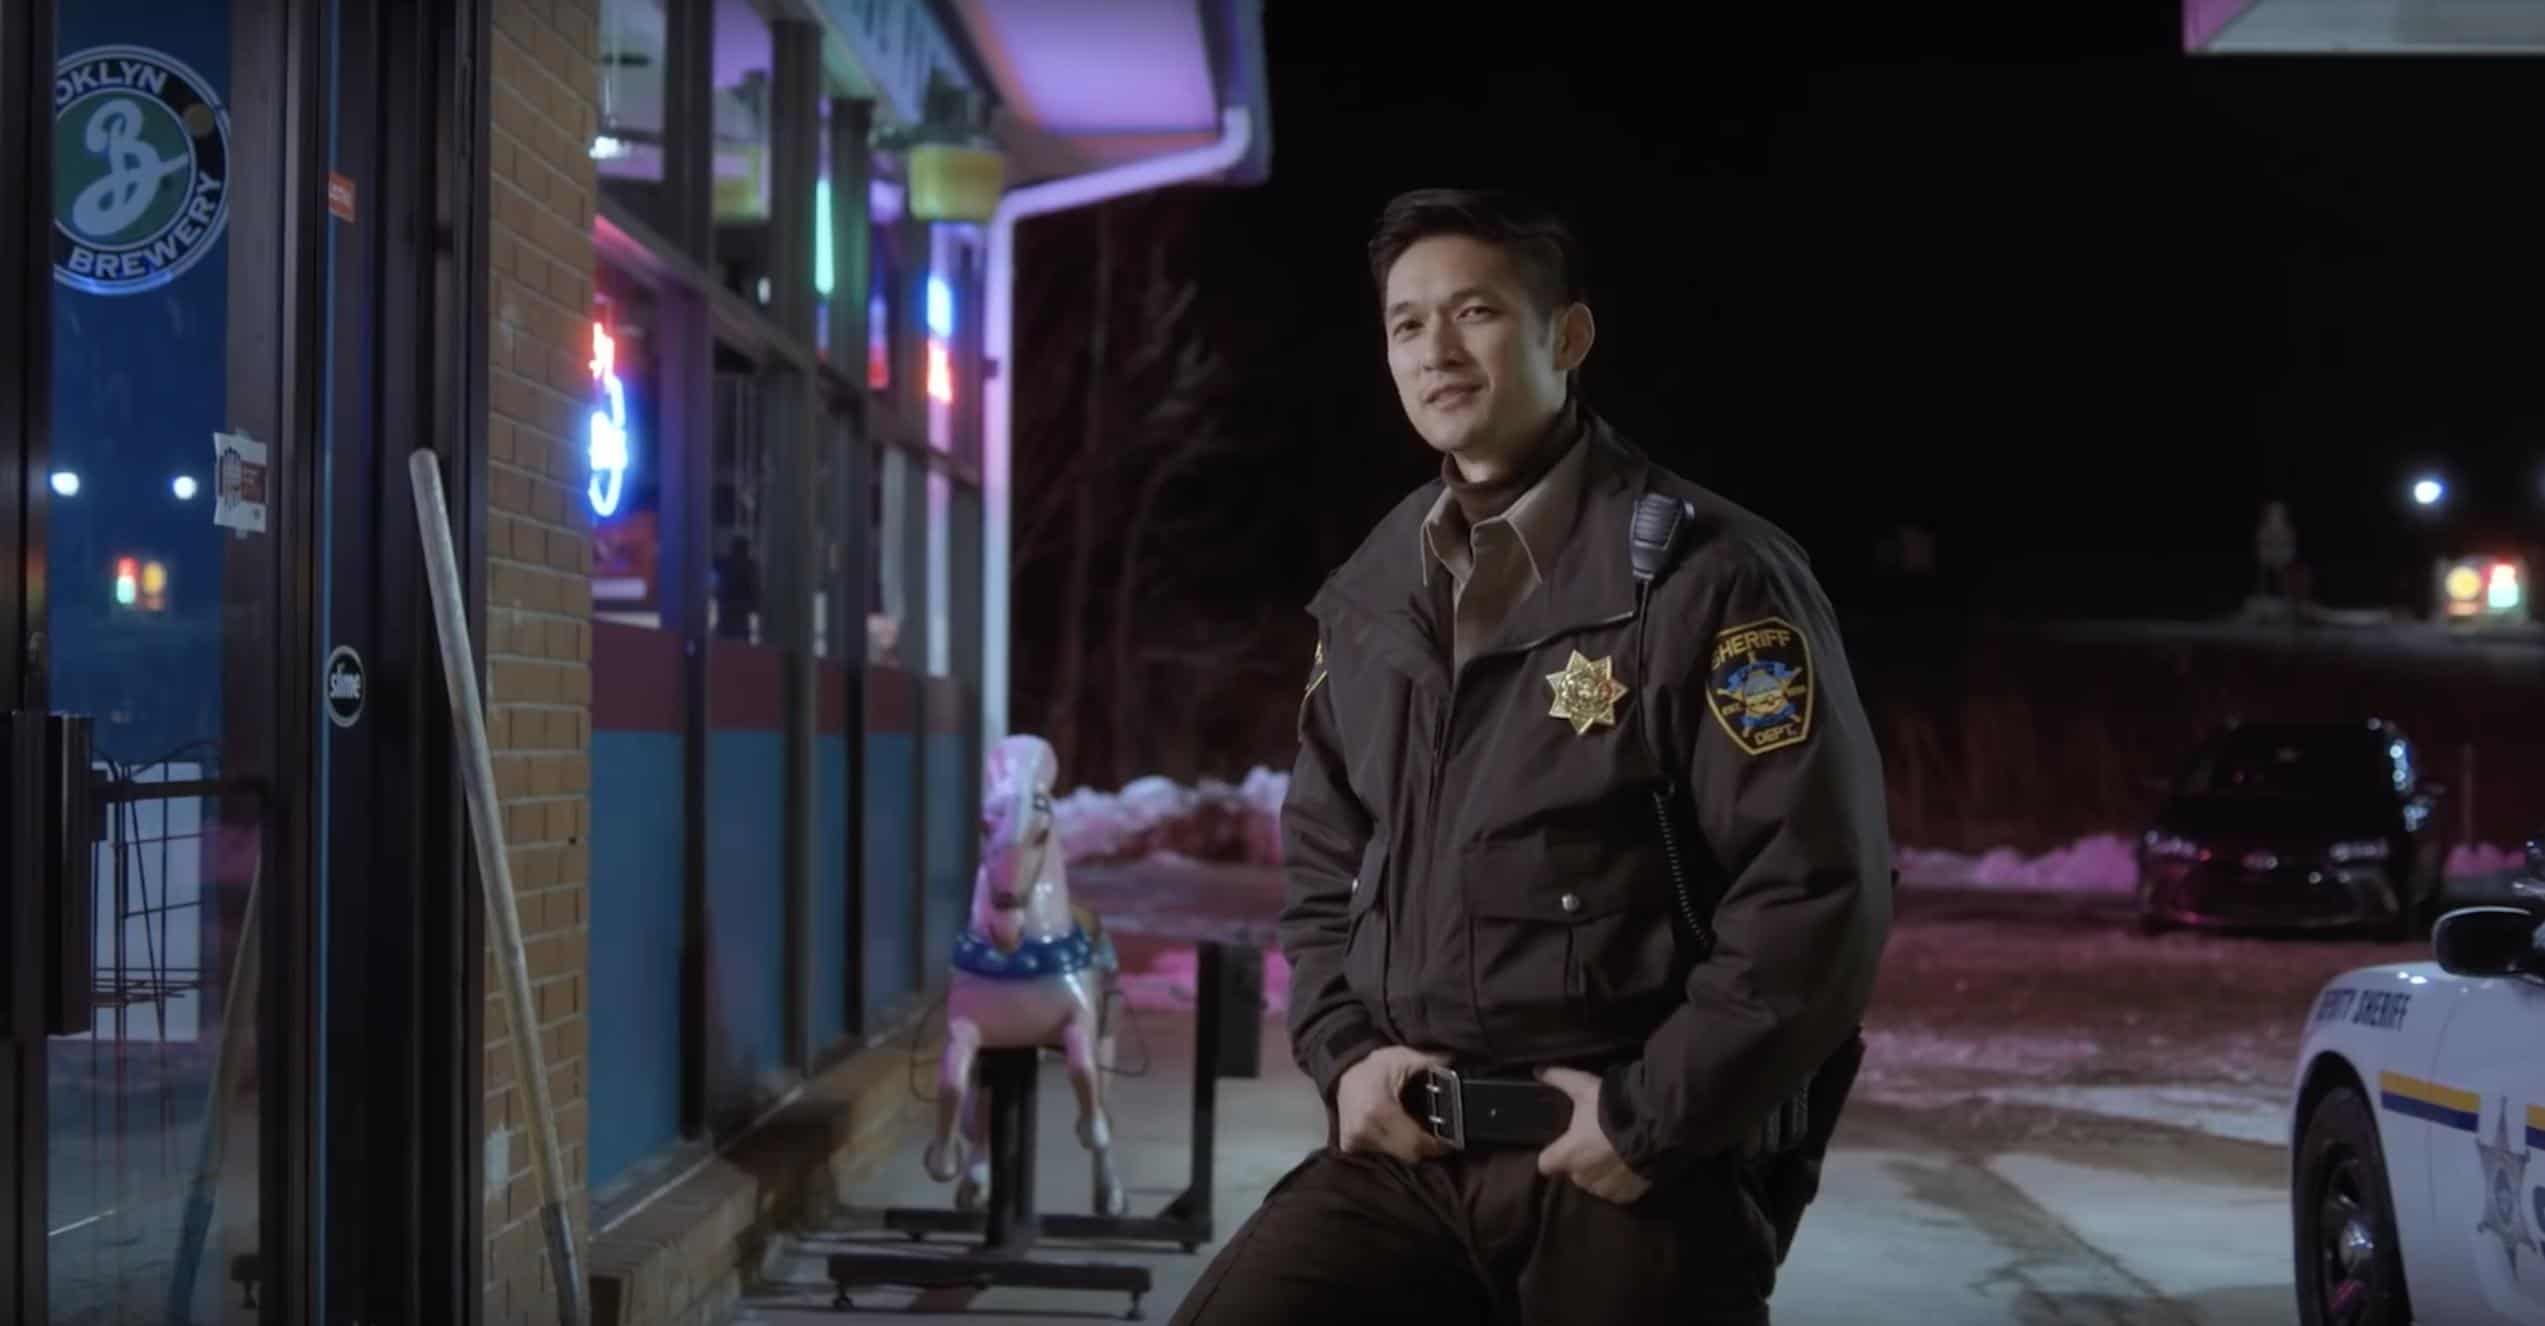 Liu, the police officer in the film, Burn (Credits: Momentum Pictures)